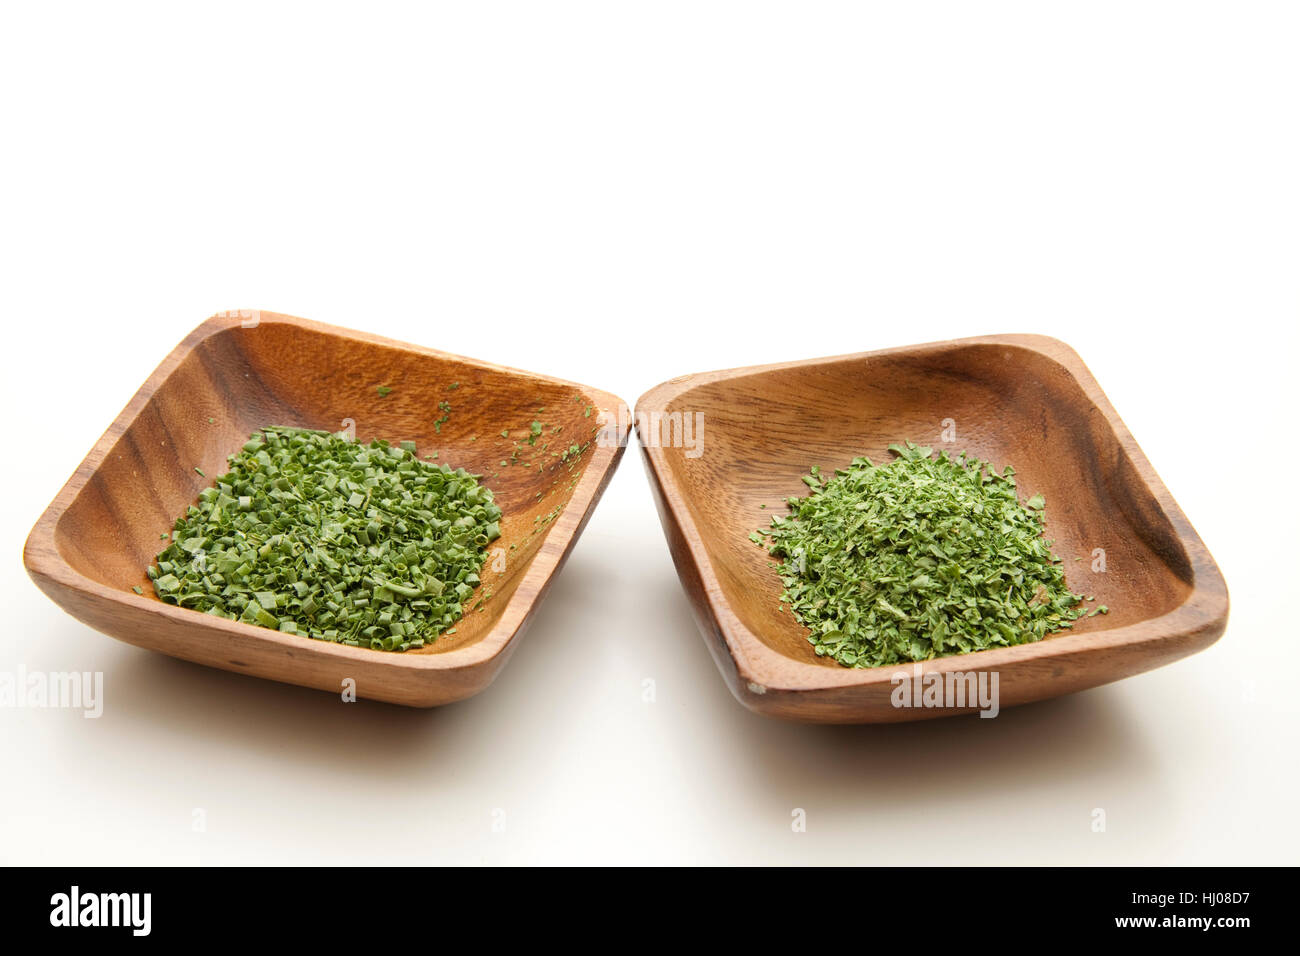 parsley, chives, chive, herbs, food, aliment, dried, parsley, chives, chive, Stock Photo